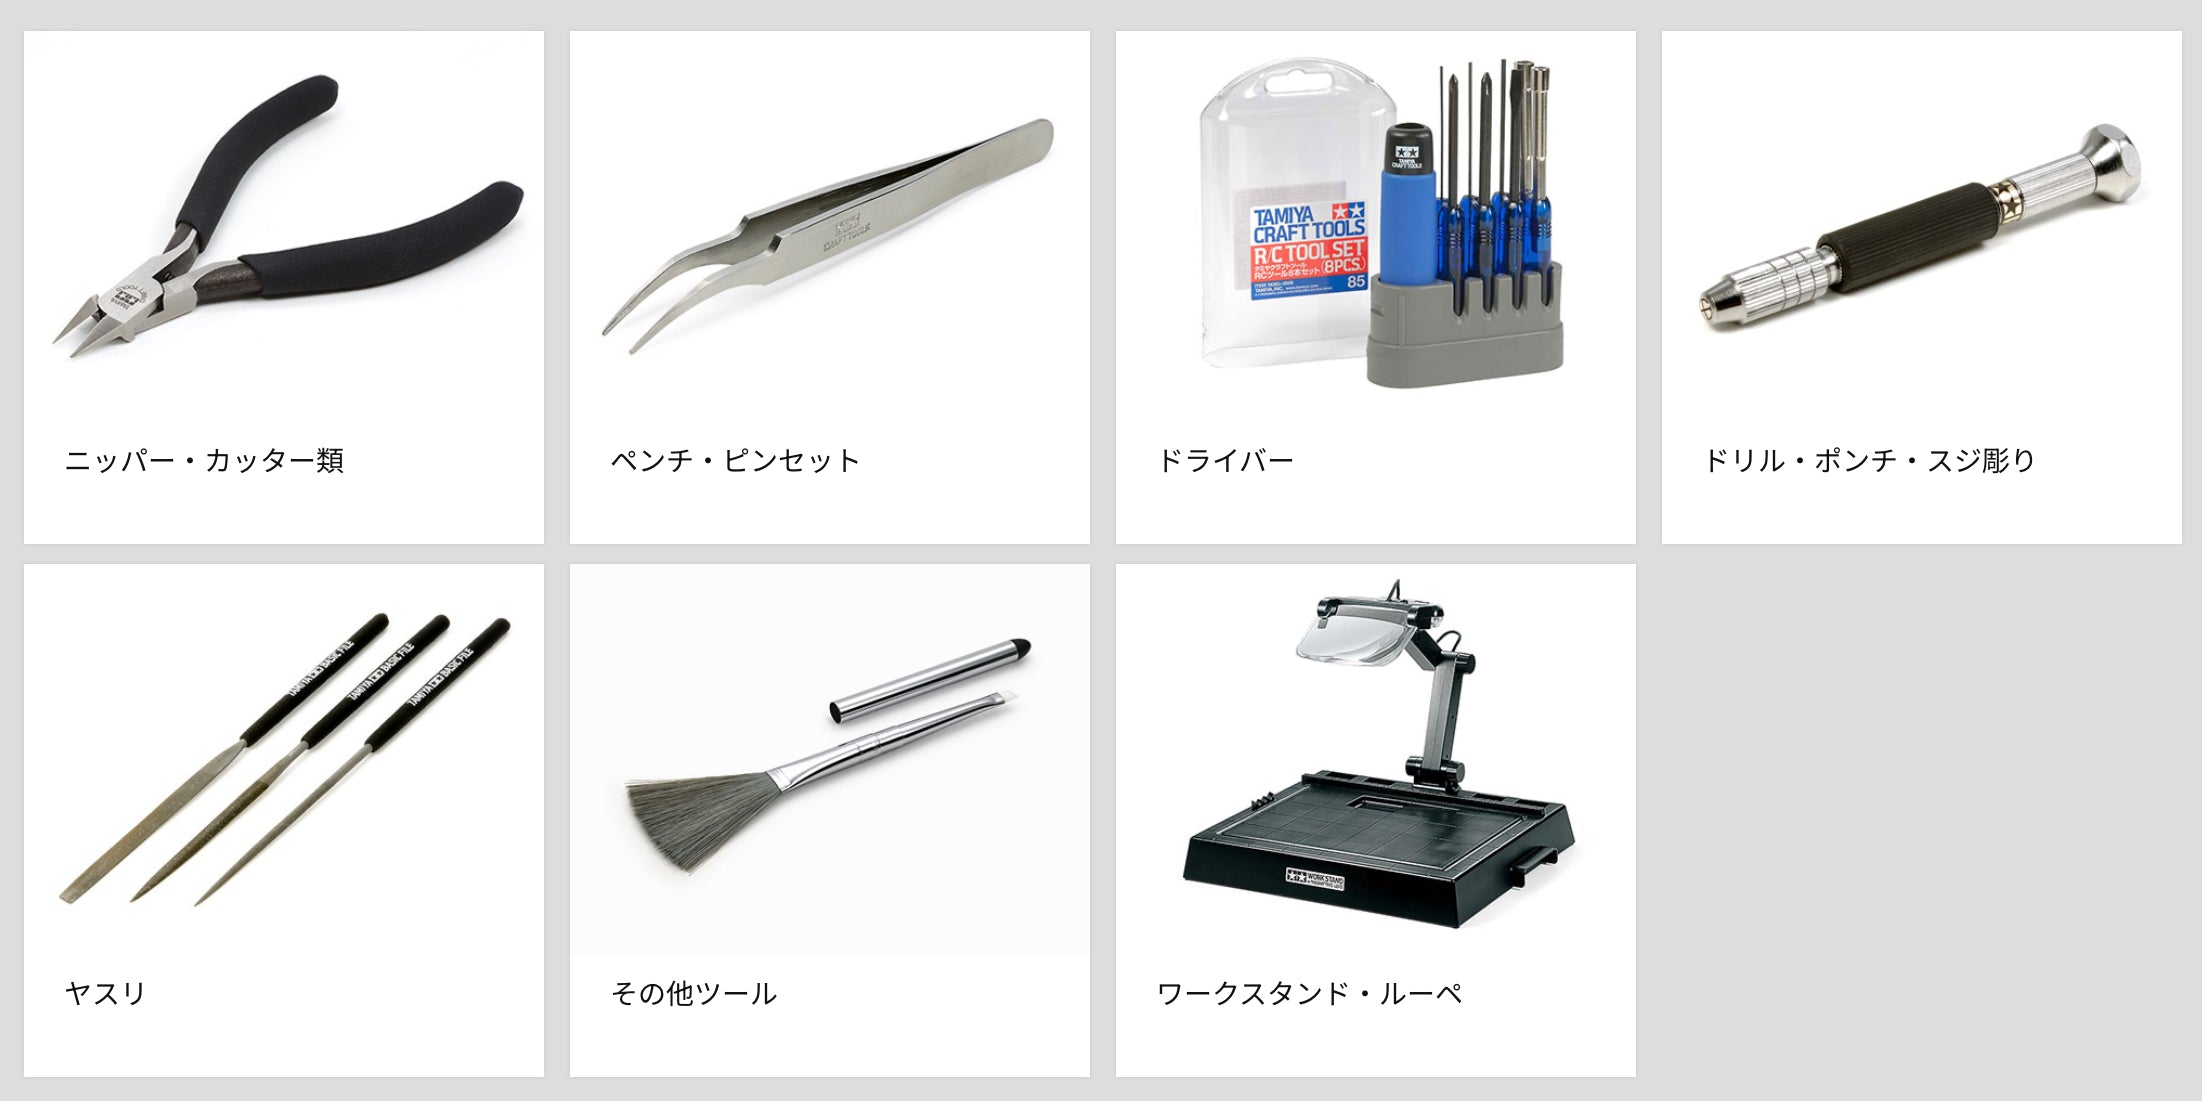 Building & Assembly Tools